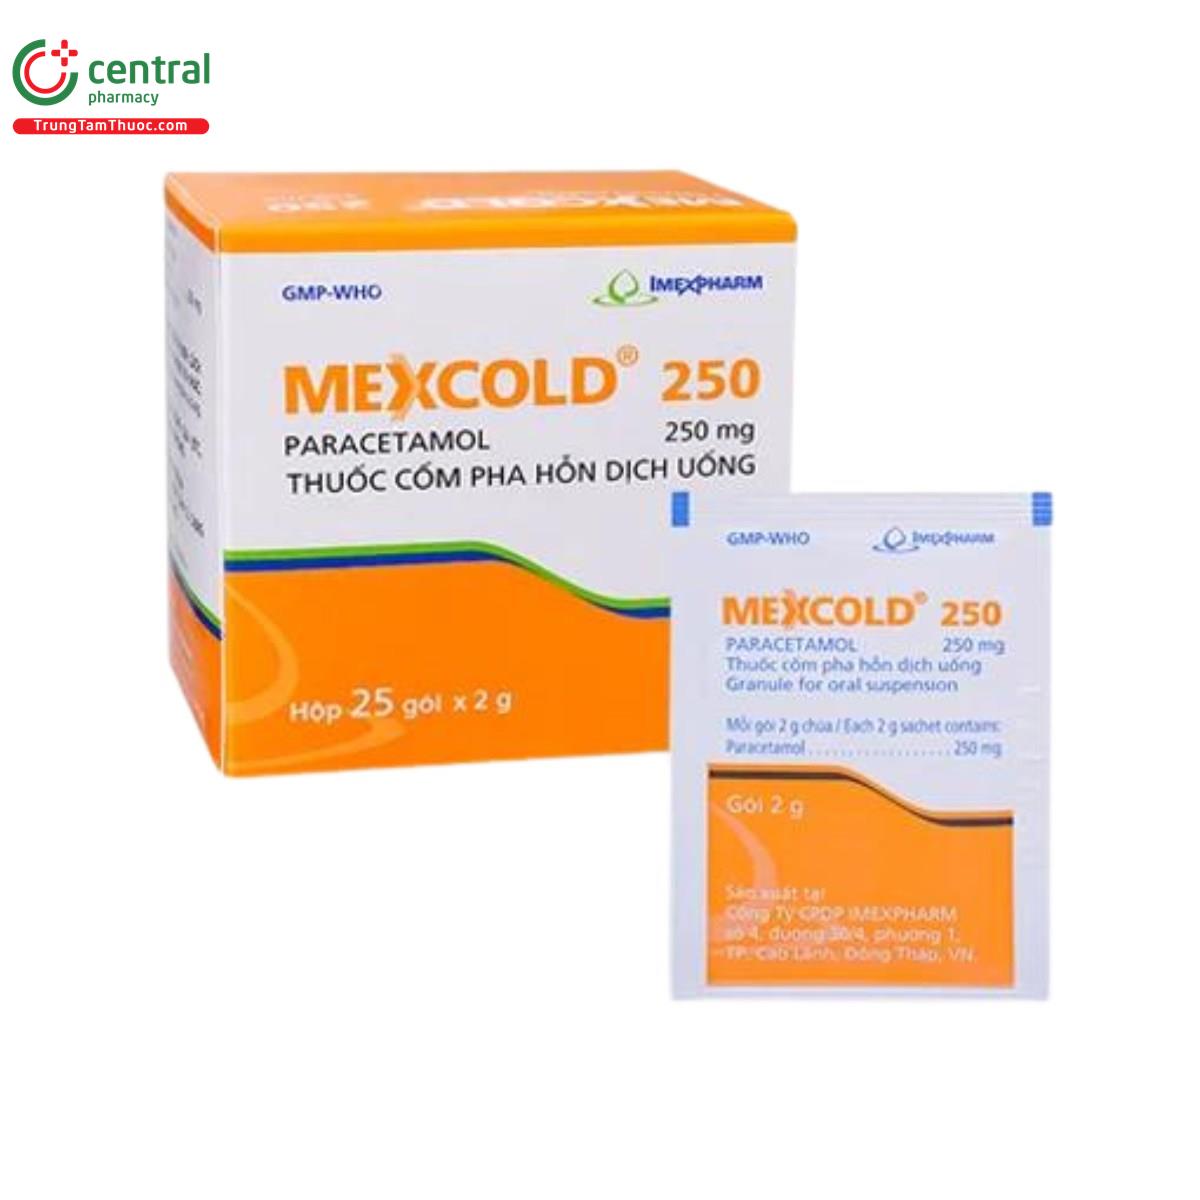 mexcold 250 2 P6628